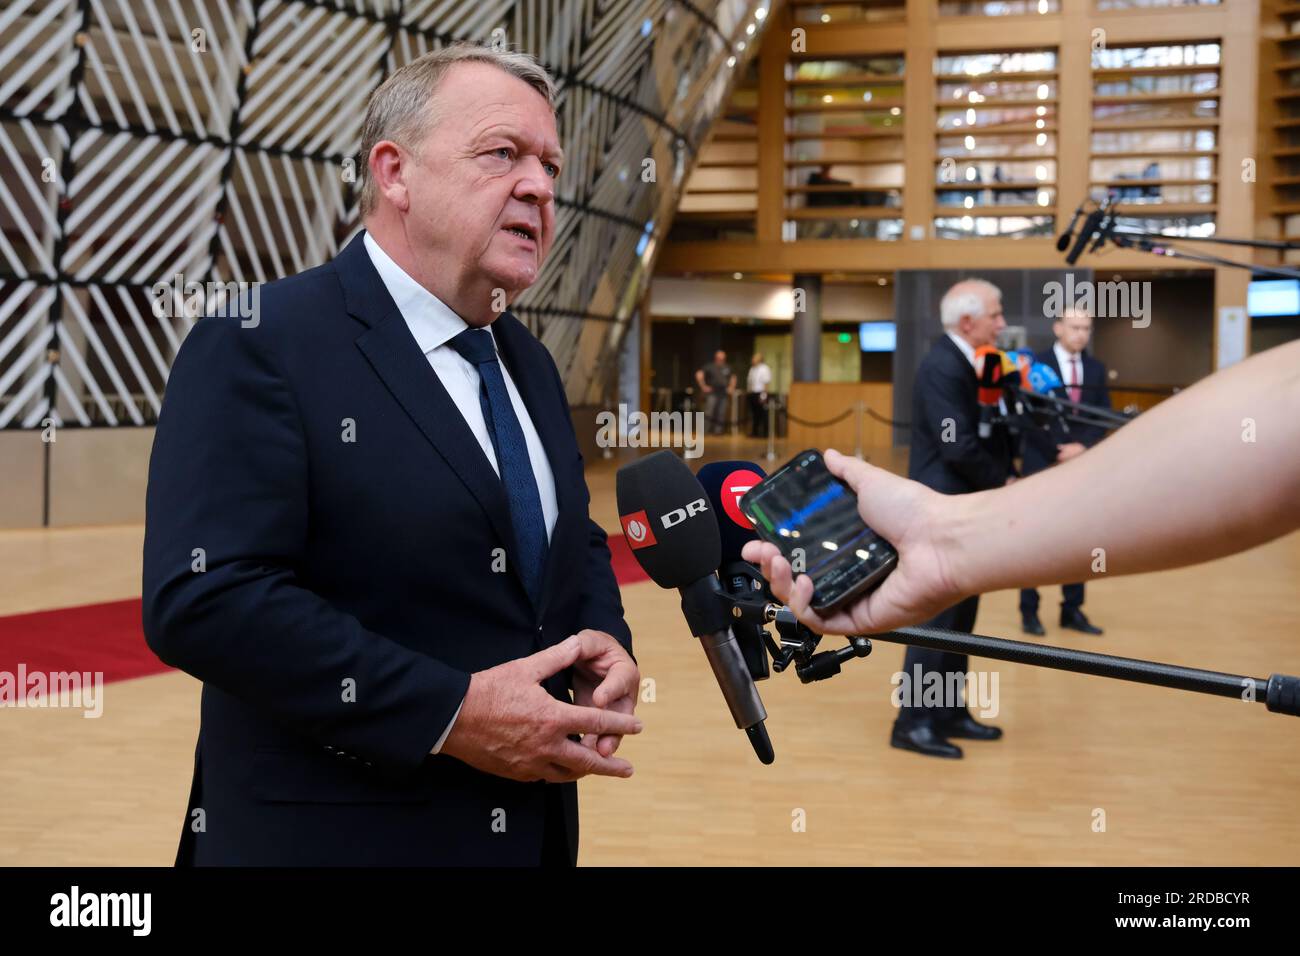 Brussels, Belgium. 20th July, 2023. Lars LOKKE RASMUSSEN, Minister of Foreign Affairs arrives for a meeting of EU Foreign Affairs Council (FAC) at the EU headquarters in Brussels, Belgium on July 20, 2023. Credit: ALEXANDROS MICHAILIDIS/Alamy Live News Stock Photo